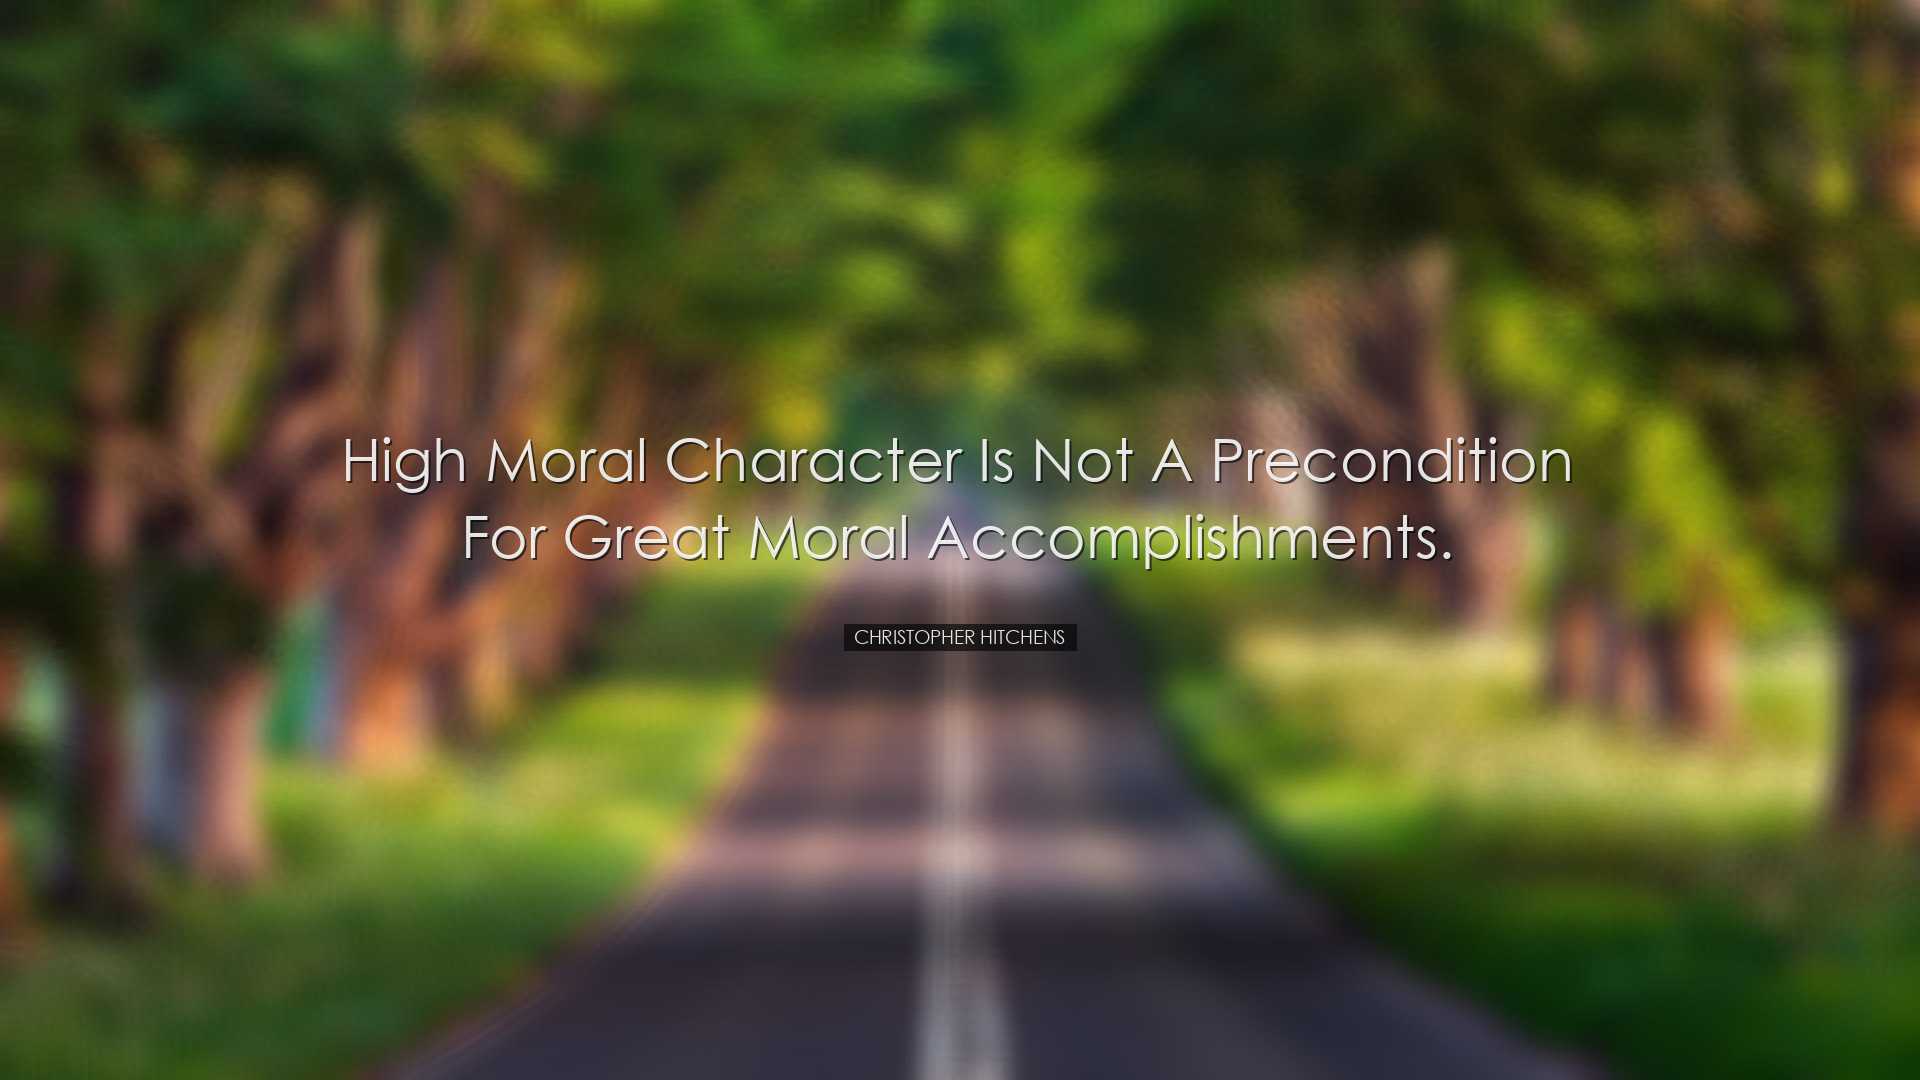 High moral character is not a precondition for great moral accompl